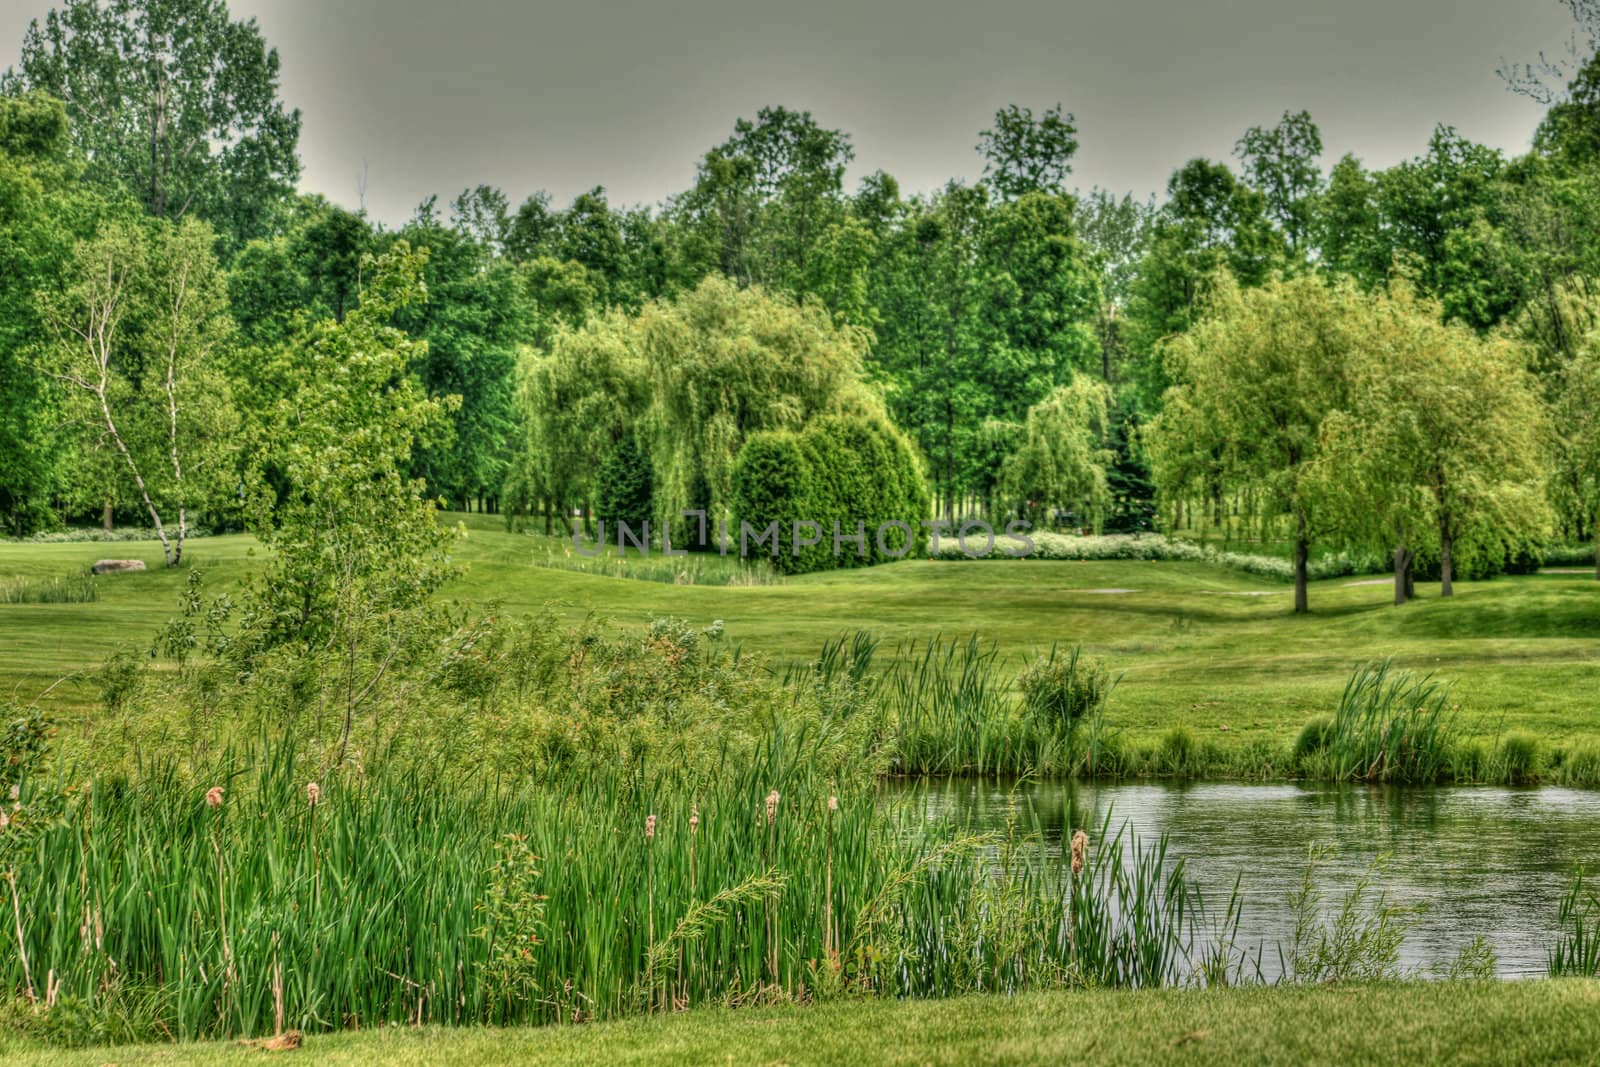 Golf green and water hazard with trees and greenery